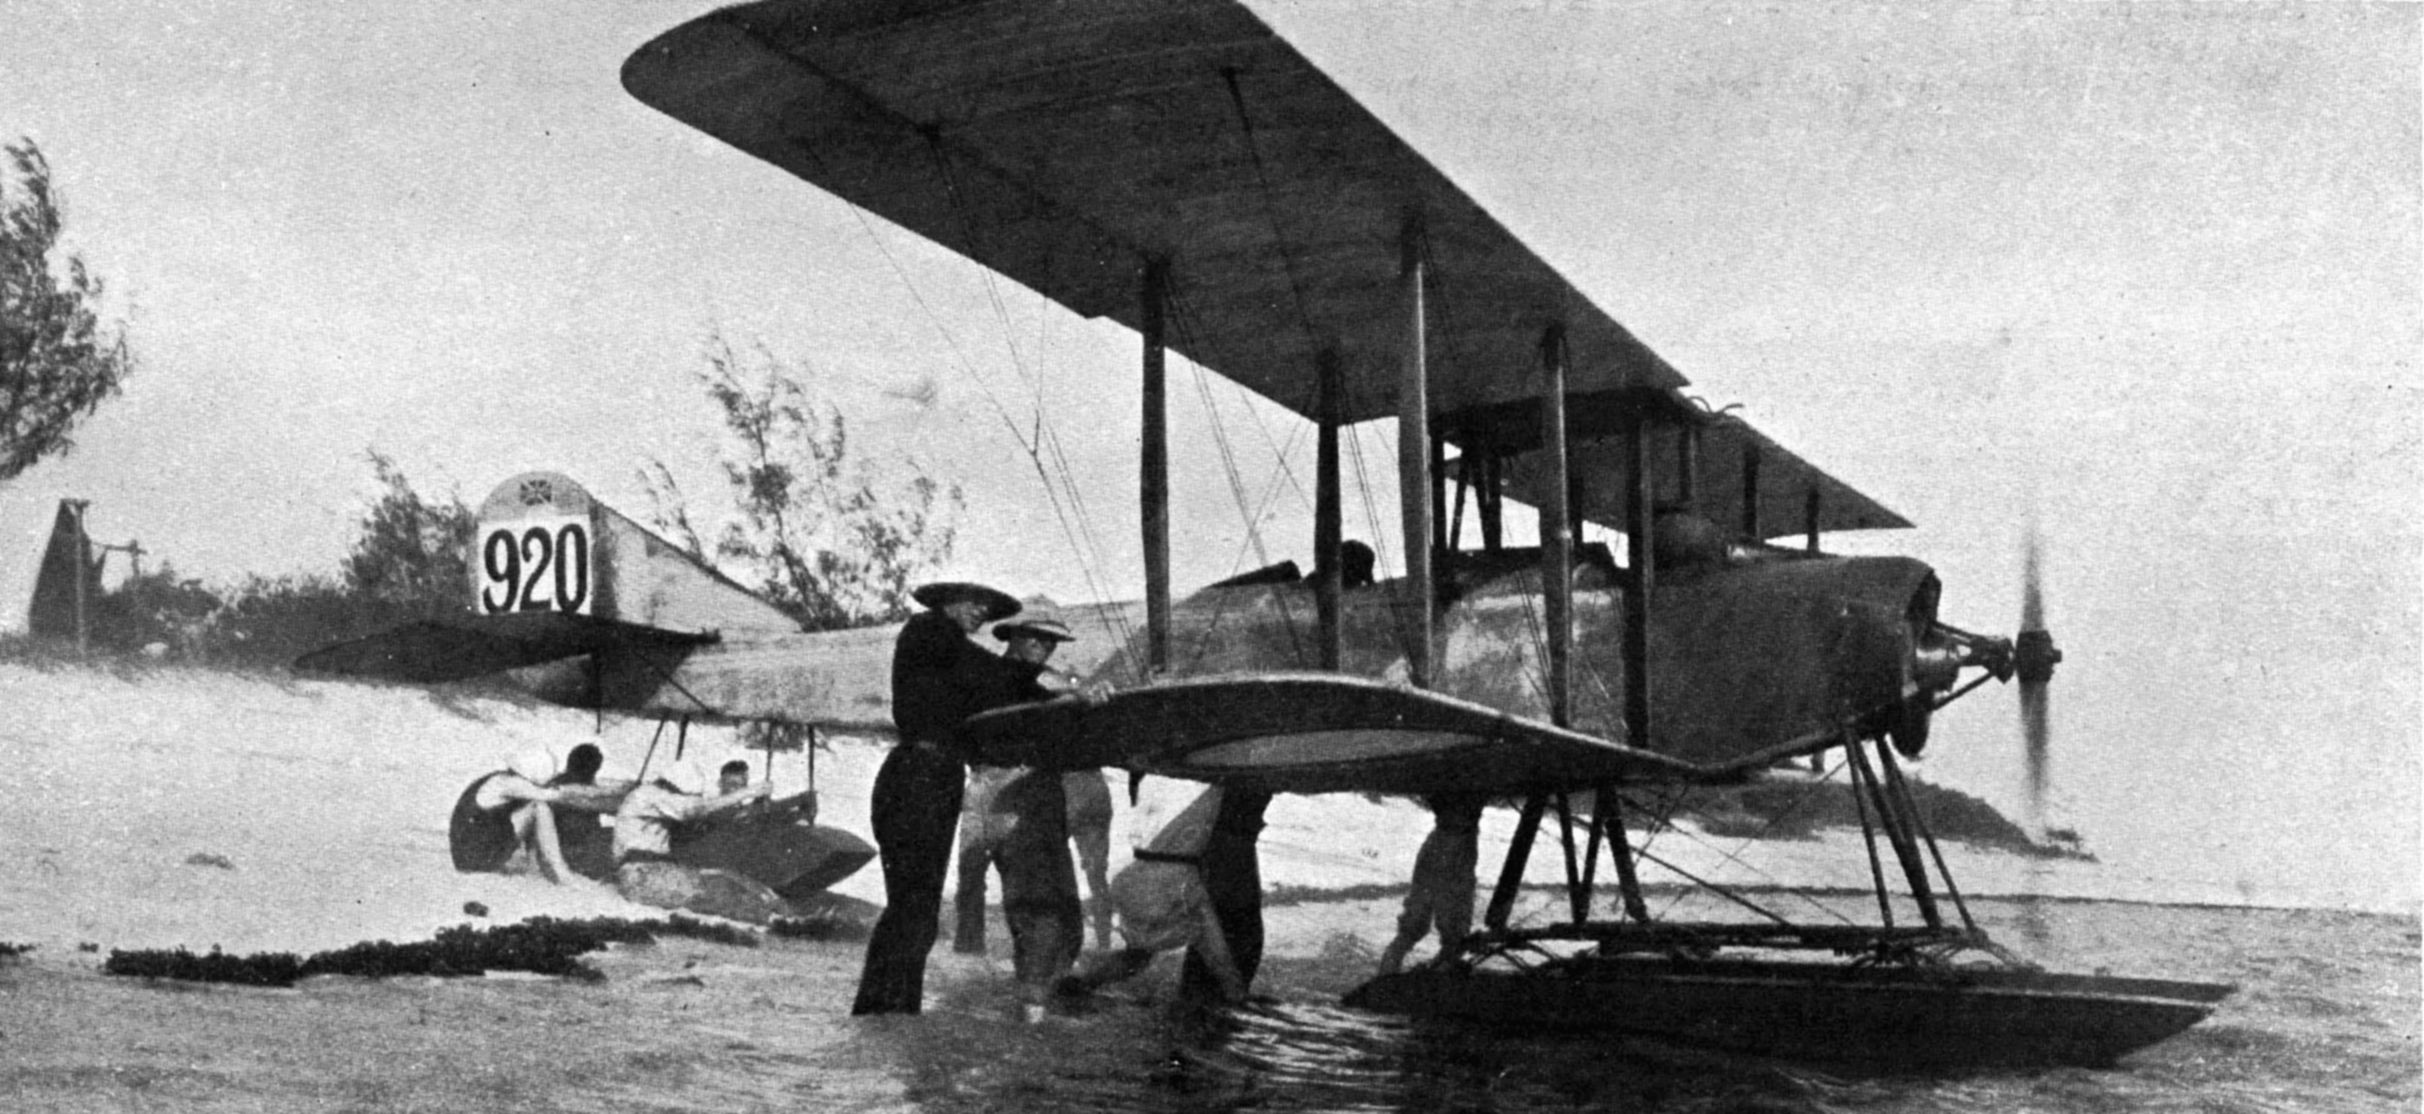 A Sopwith Camel seaplane prepares to search for the German warship.